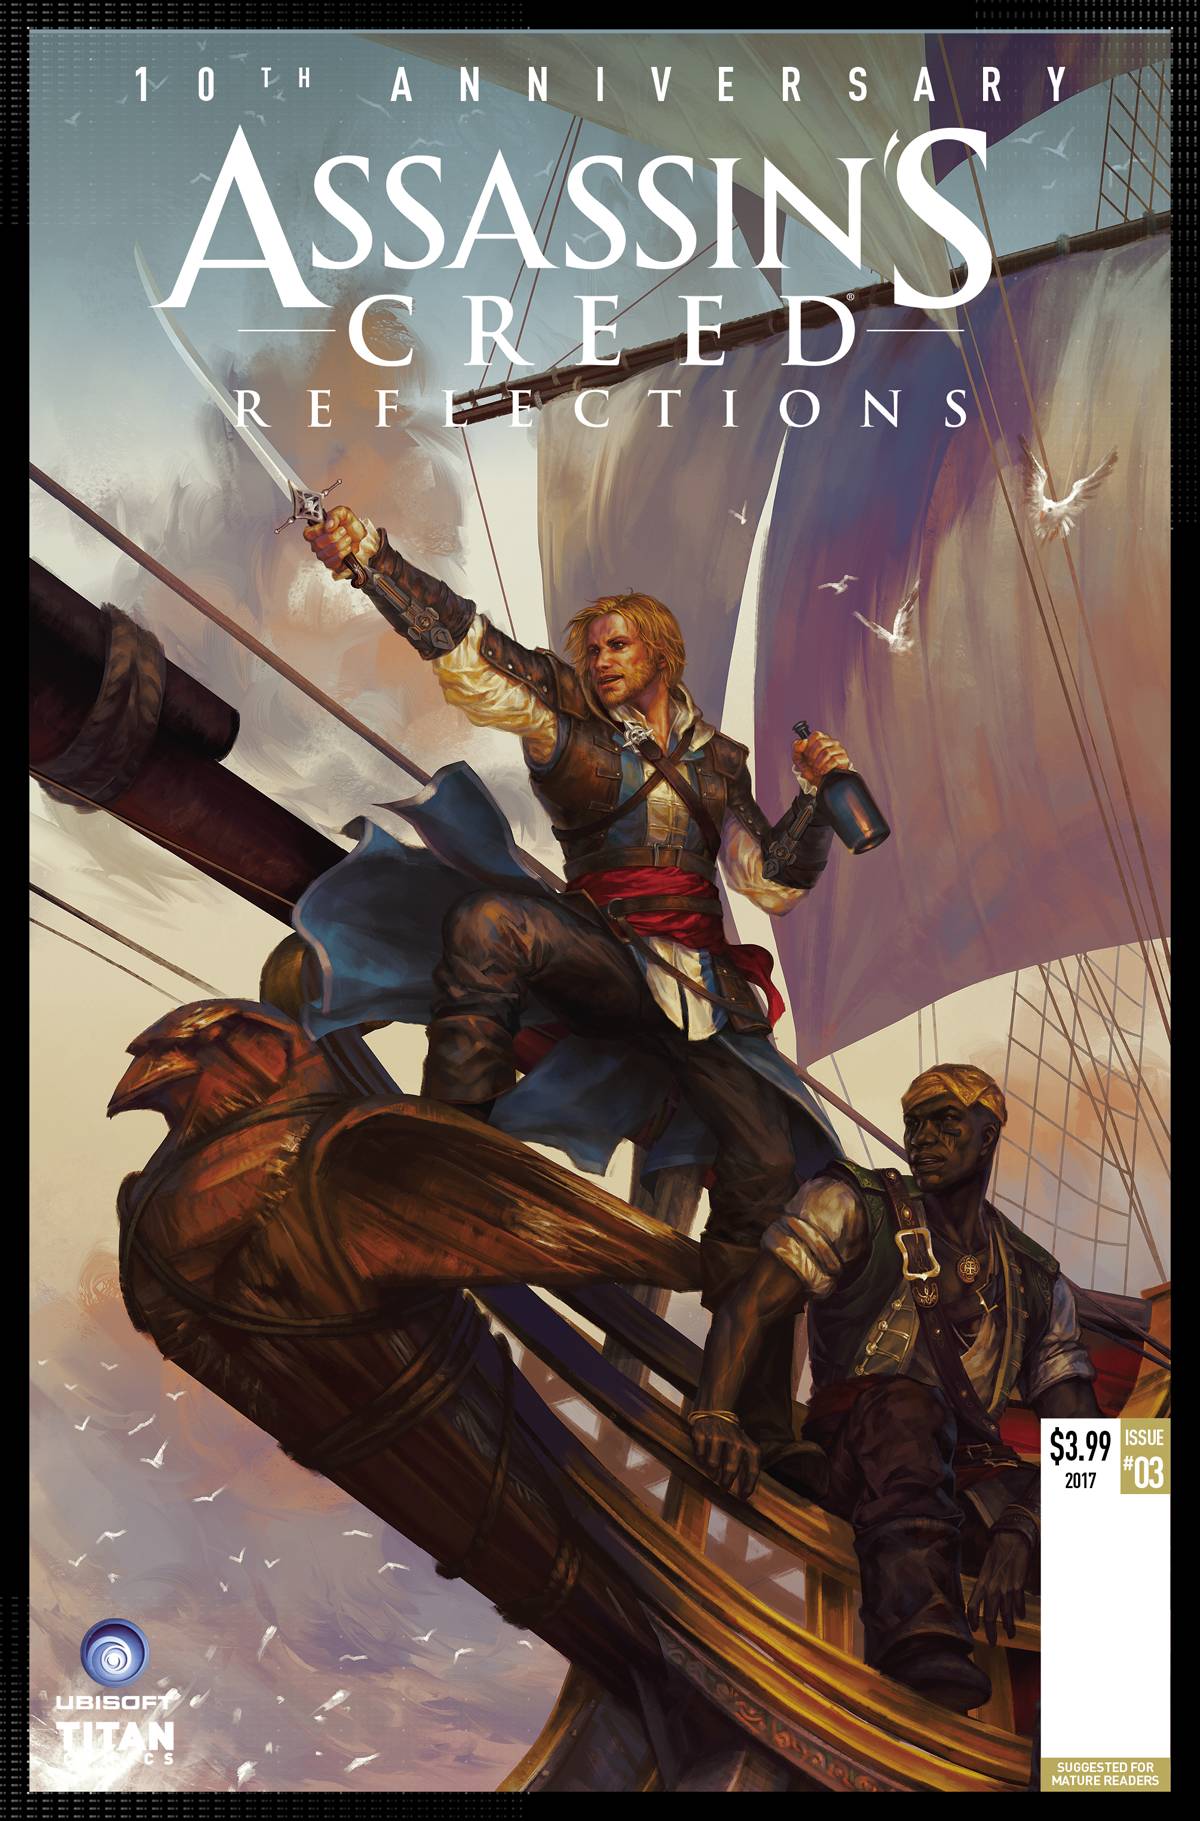 Assassins Creed Reflections #3 Cover A Sunsetagain